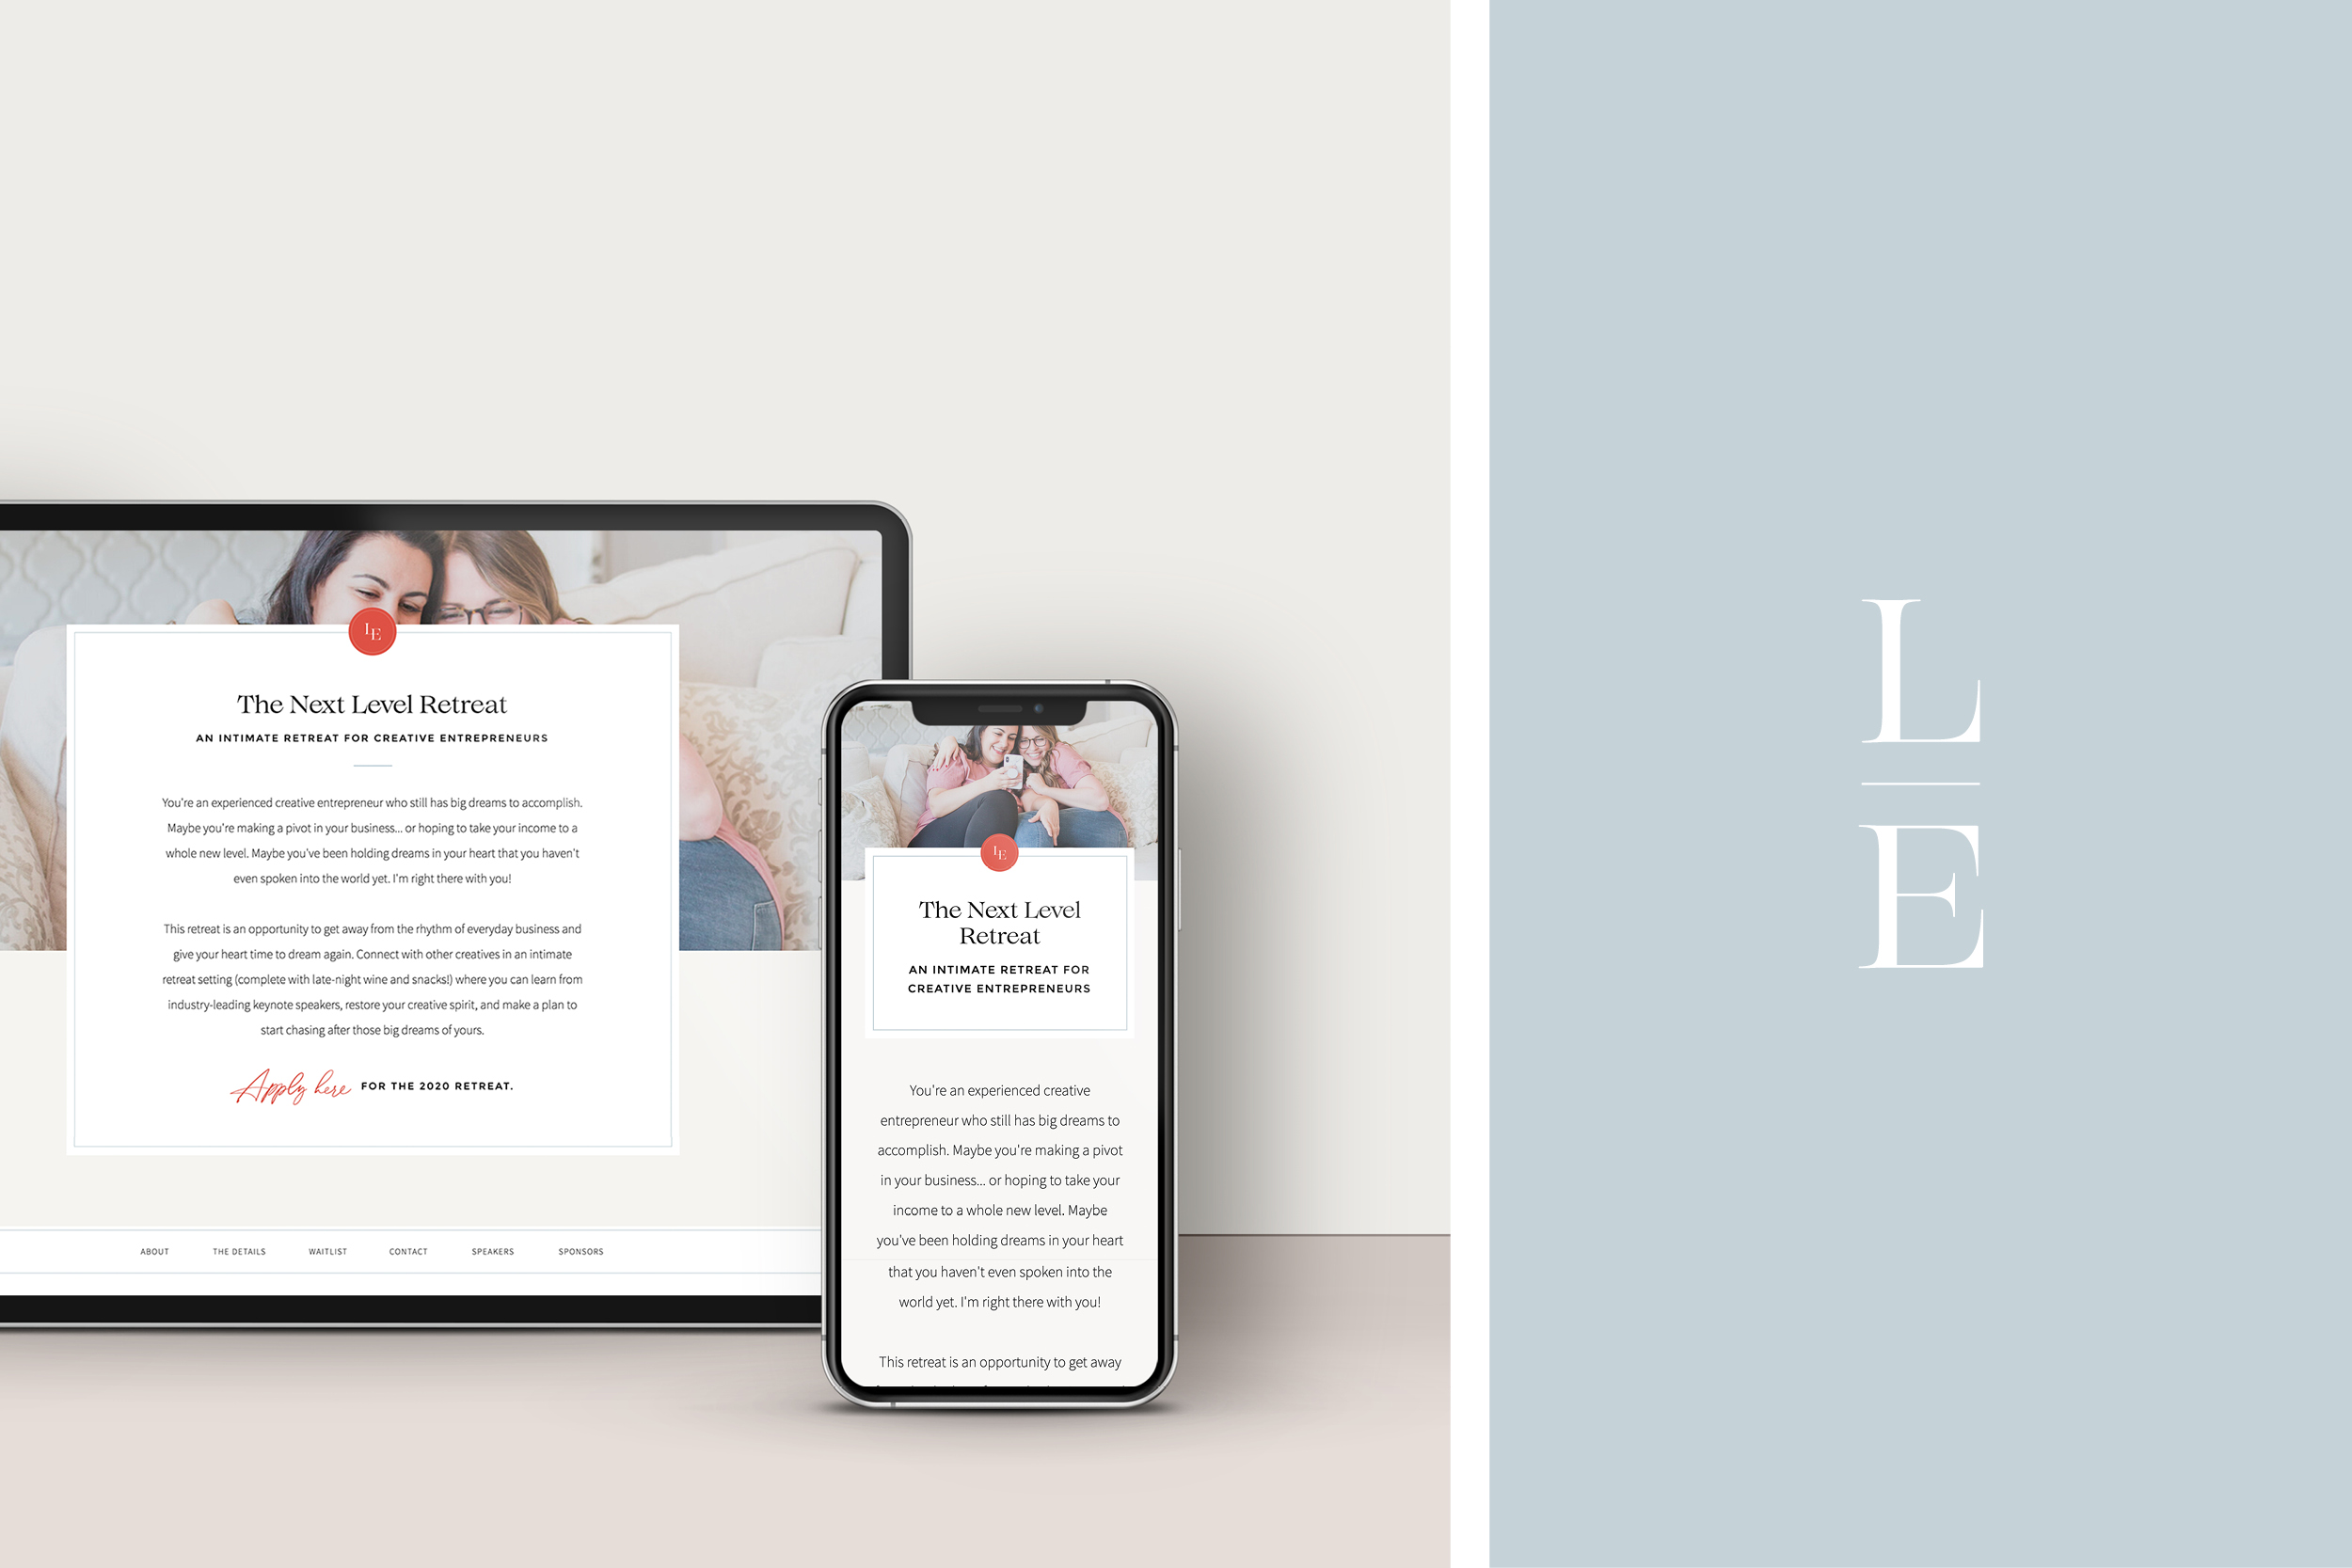 Brand and Website Design for Creative Educator Laylee Emadi | by Sarah Ann Design